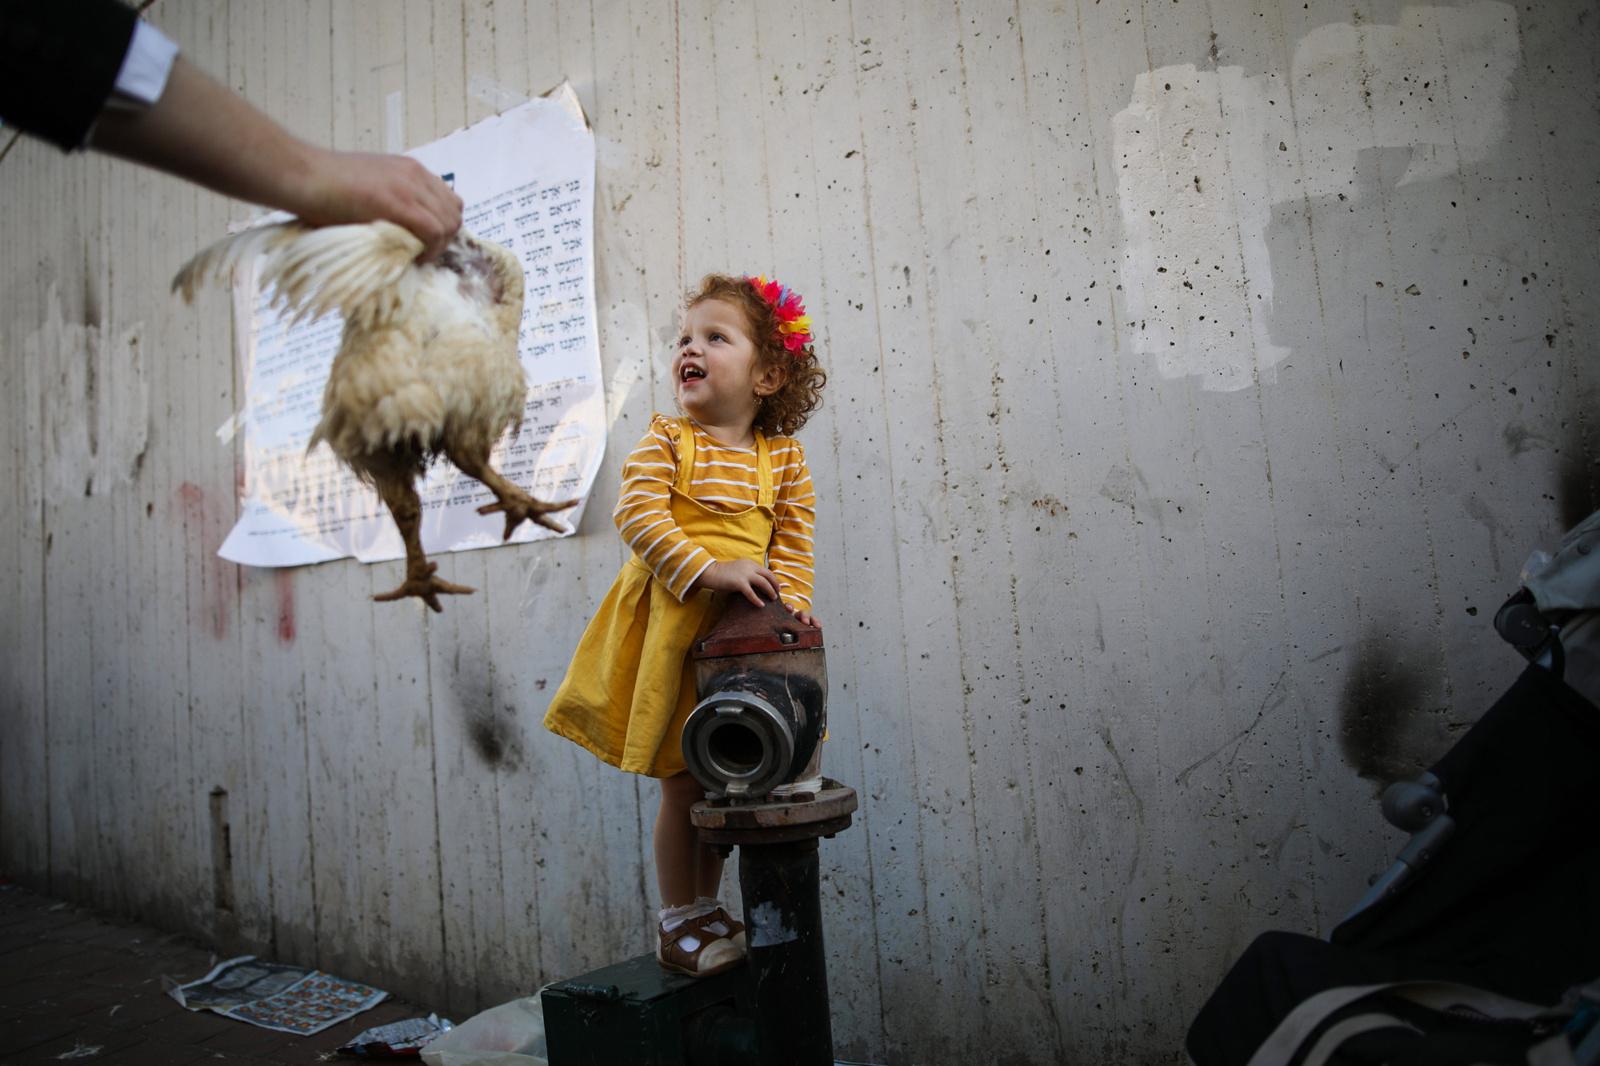 Ultra-Orthodox Community - An ultra-Orthodox Jewish girl looks at a chicken during...